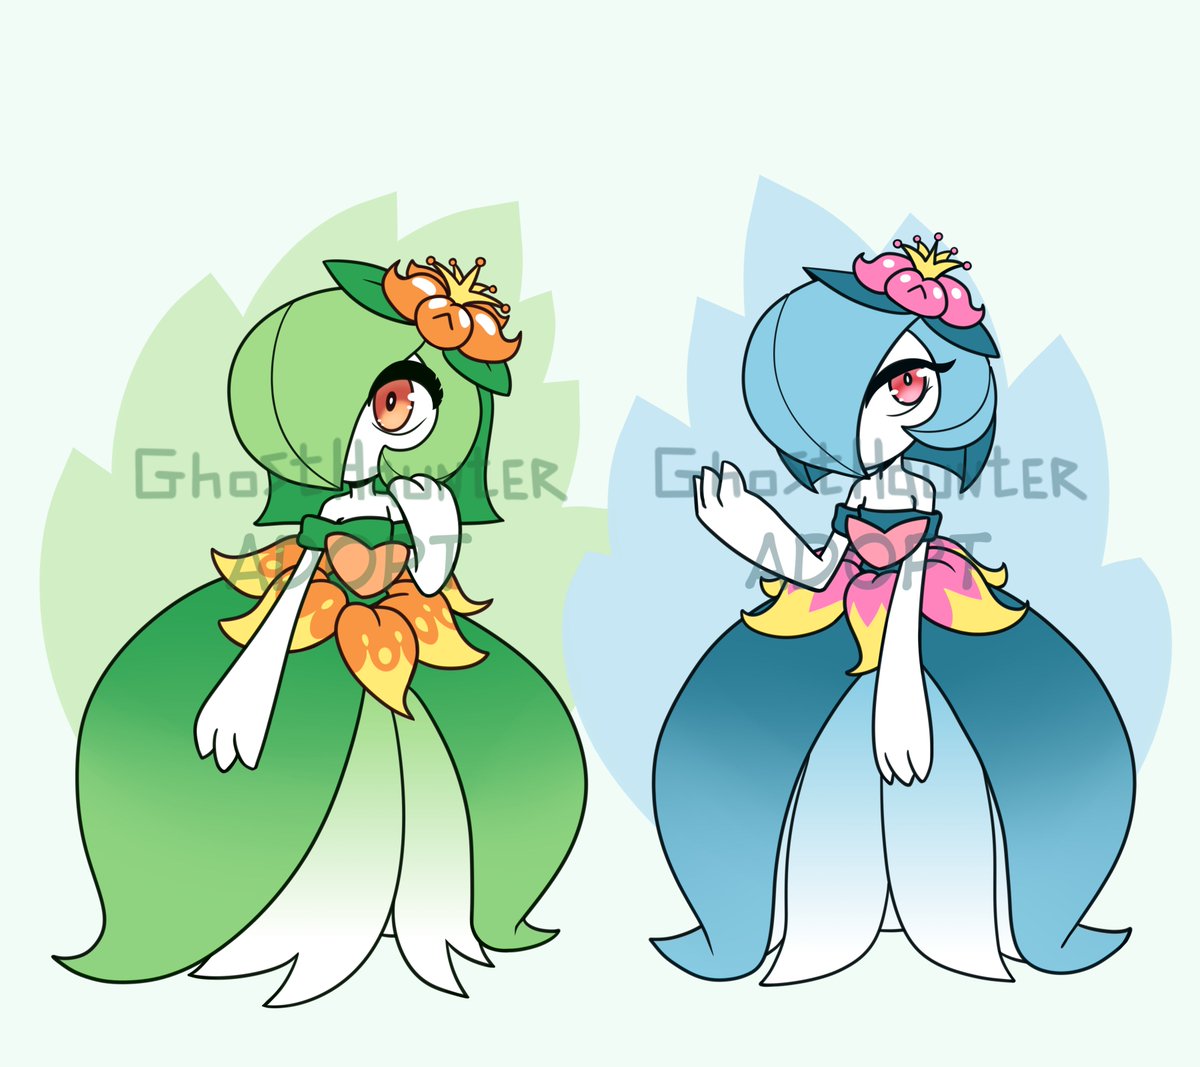 Selling #gardevoir + #lilligant #pokemon fusion #adopts

SB for regular: 60USD
SB for shiny: 60USD
MI: 5USD

If you bid more than 150USD, i'll draw reference sheet (2 fullbody + 2 head + palette)
Auction ends after 24 hours since last bid